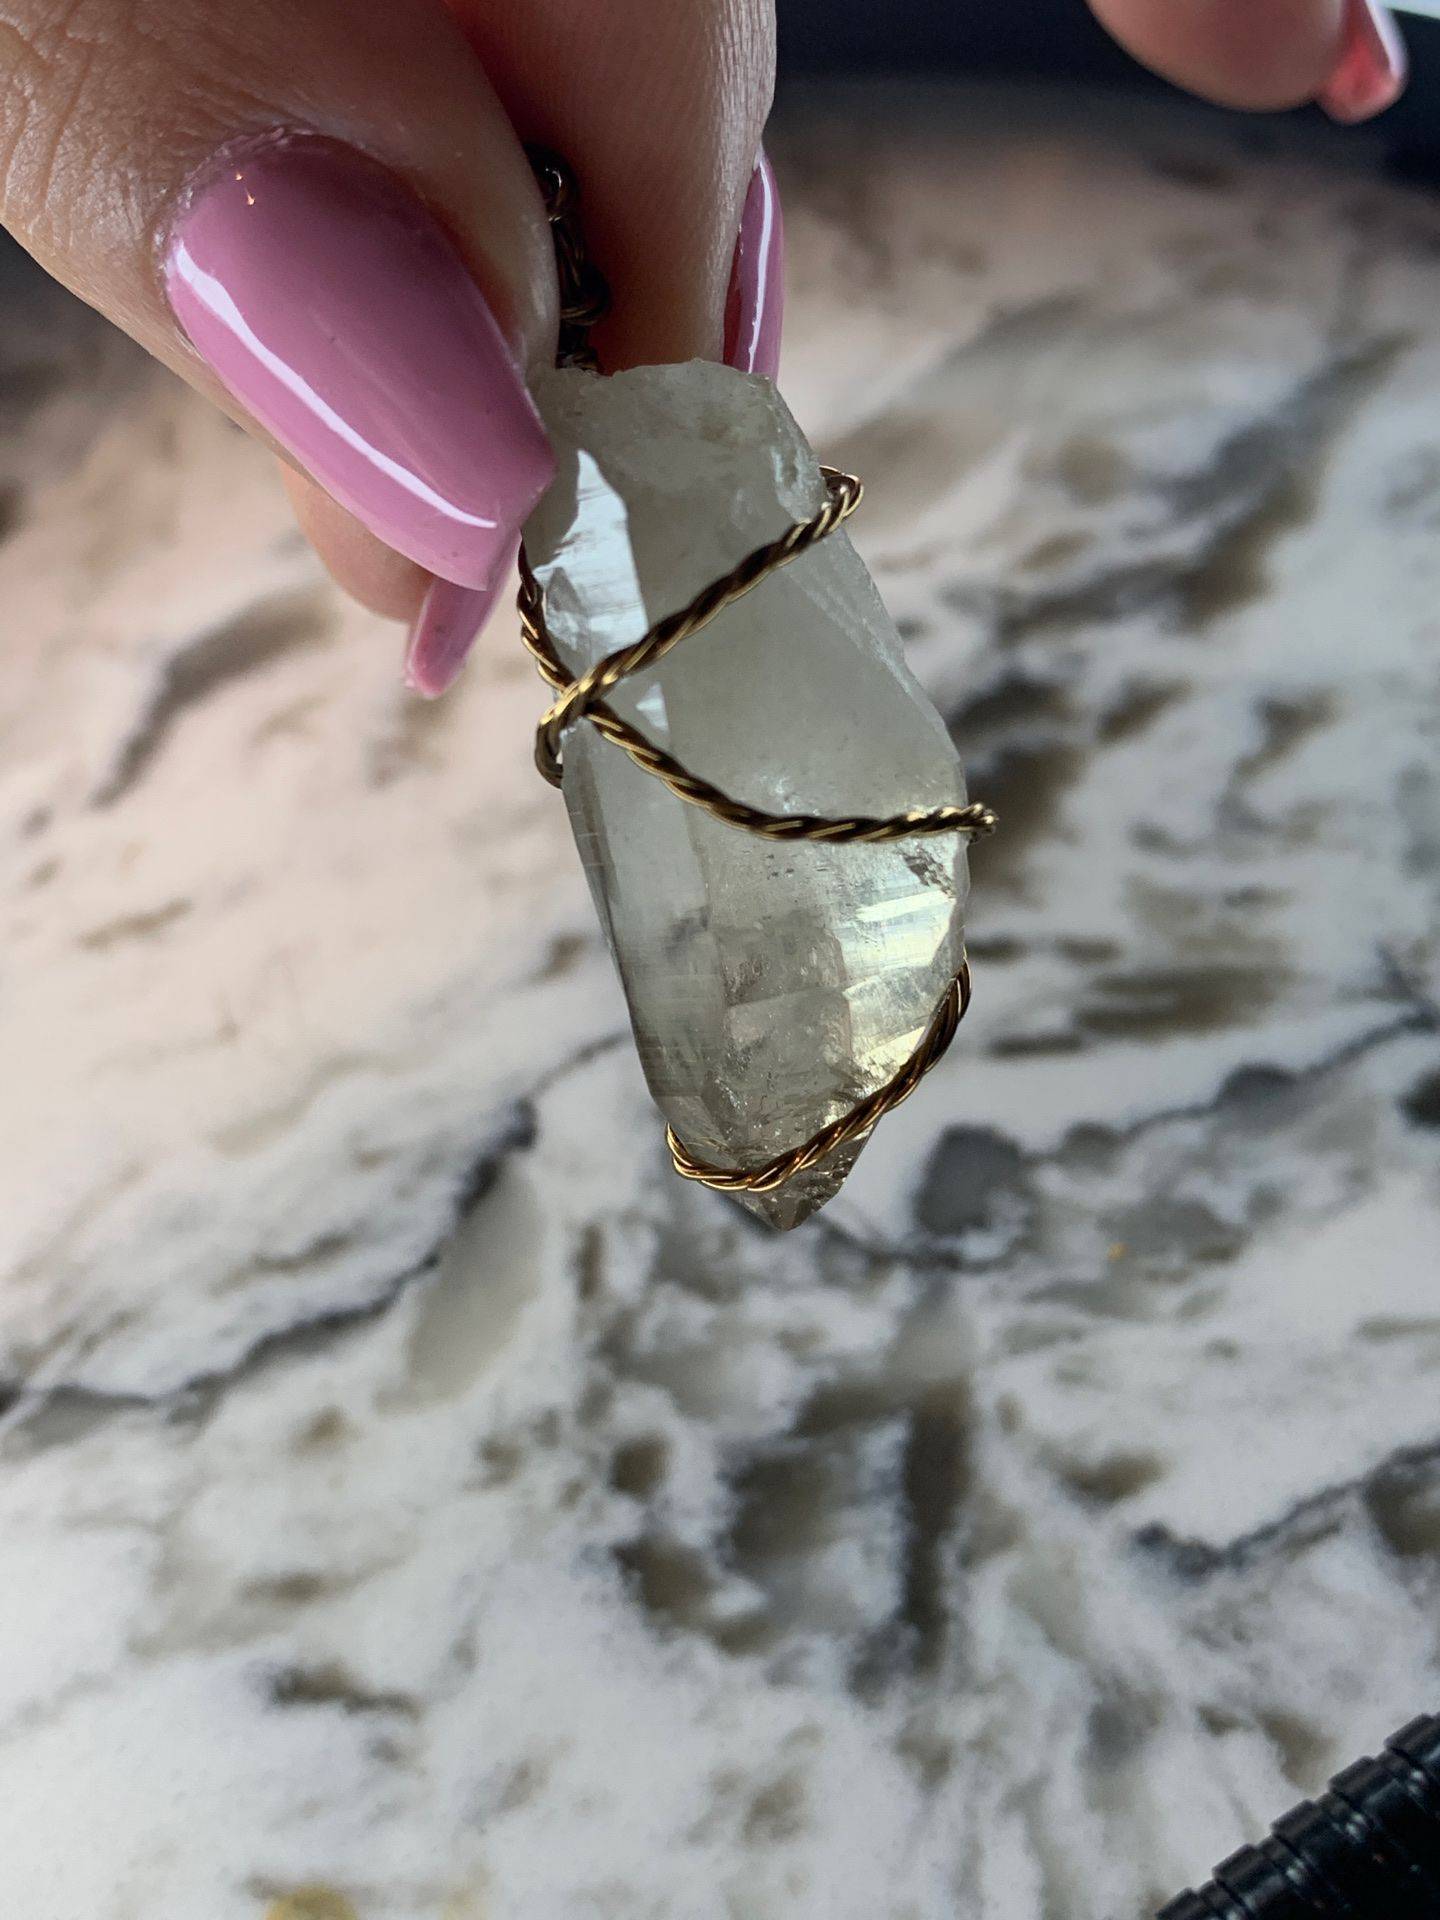 Smokey clear quartz directly from miner , mined in Utah USA amazing quality stones and dig out by hand by a rock hound 💎 support small collectors ama